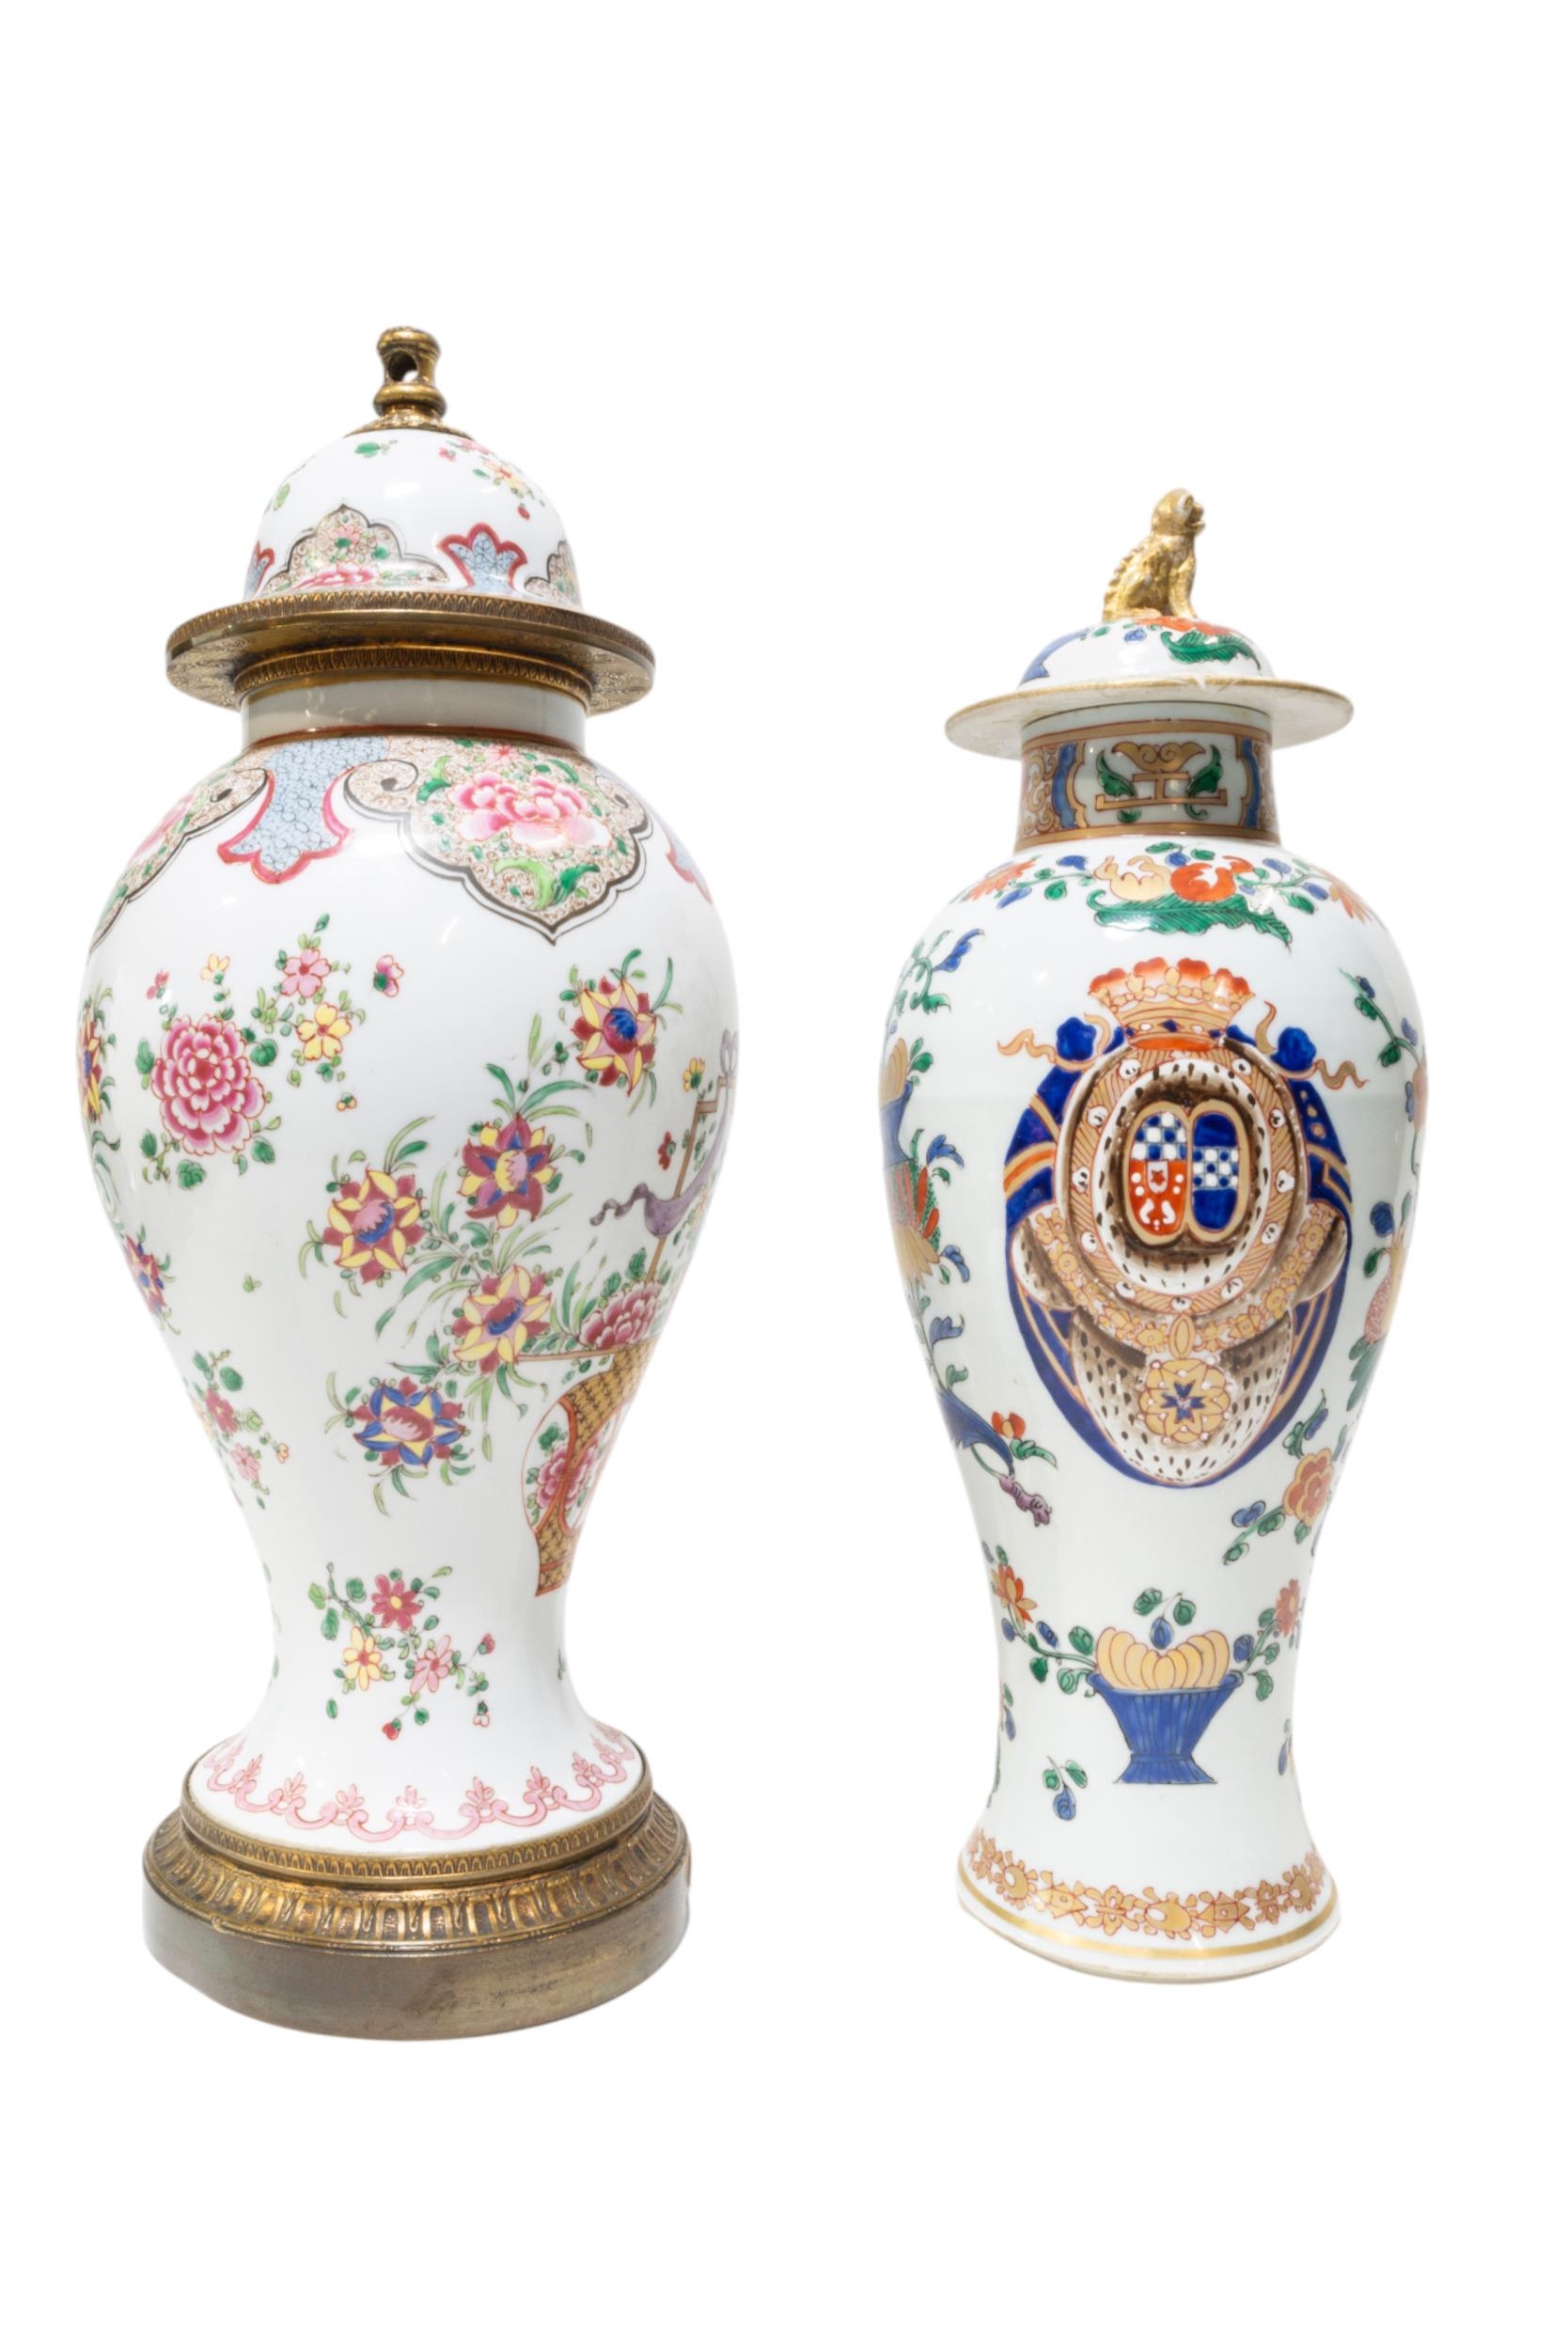 A SAMSON CHINESE EXPORT-STYLE BALUSTER VASE AND ANOTHER BALUSTER VASE, the Samson vase with armorial